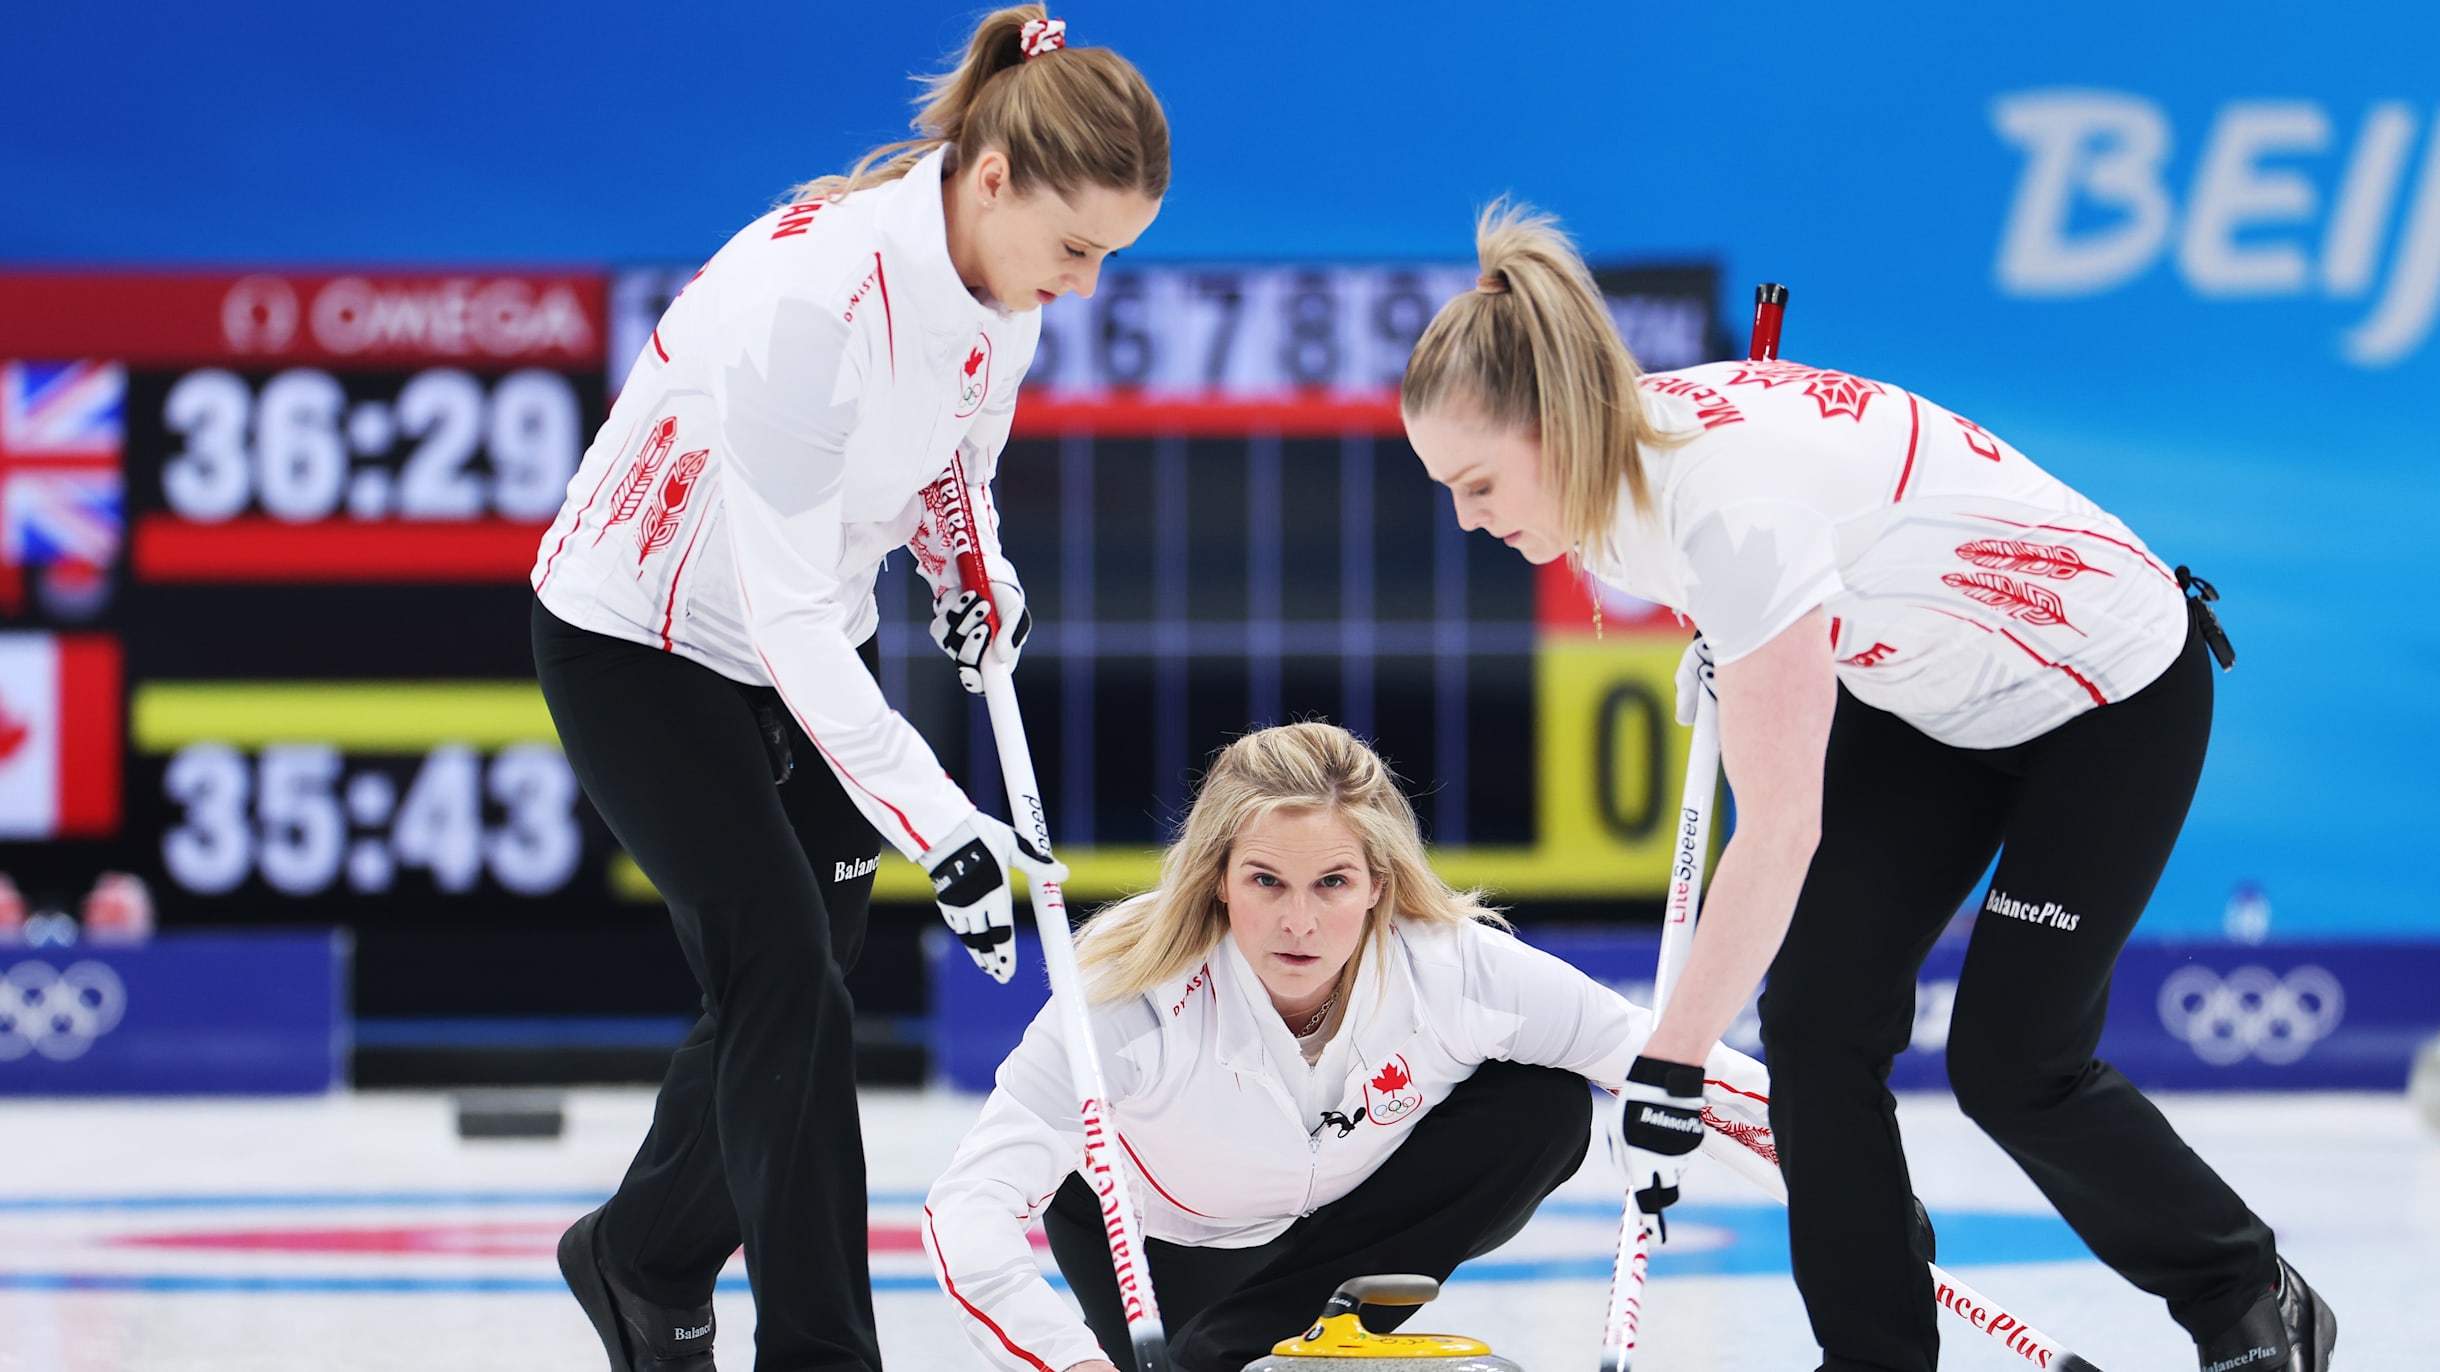 Olympic curling champion Jennifer Jones and team to split at the